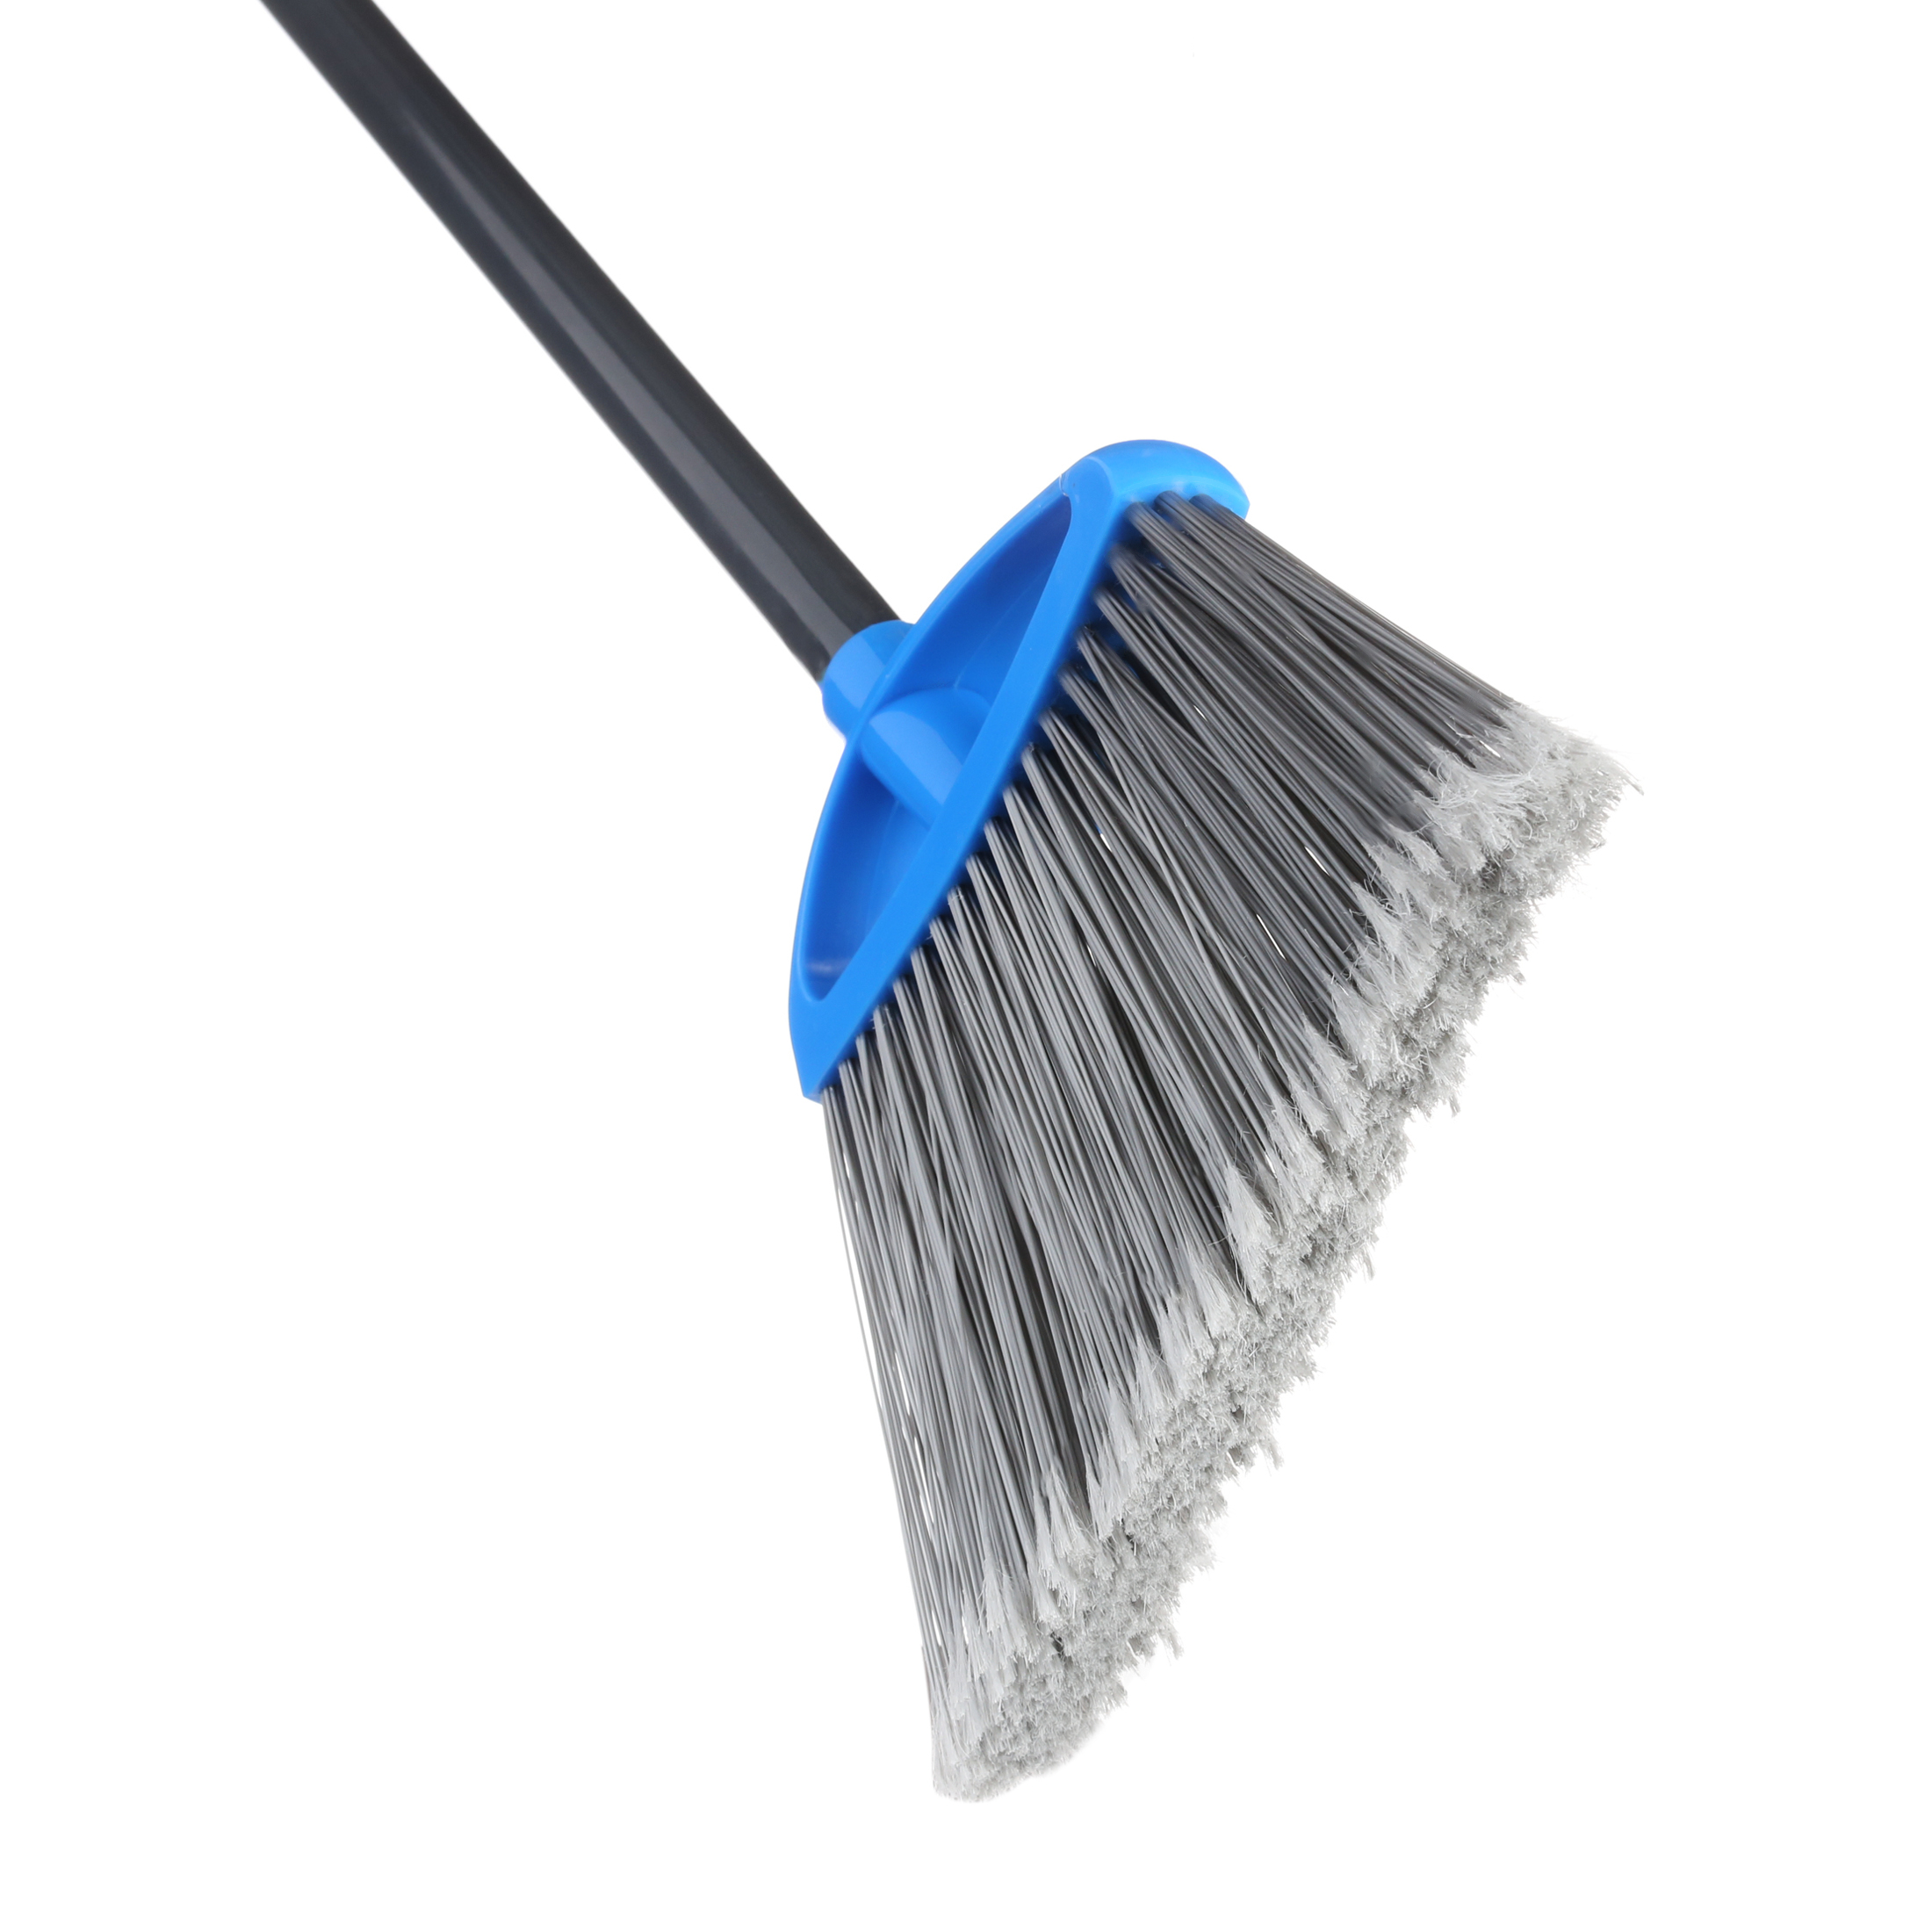 Great Value Basic Broom - image 5 of 9